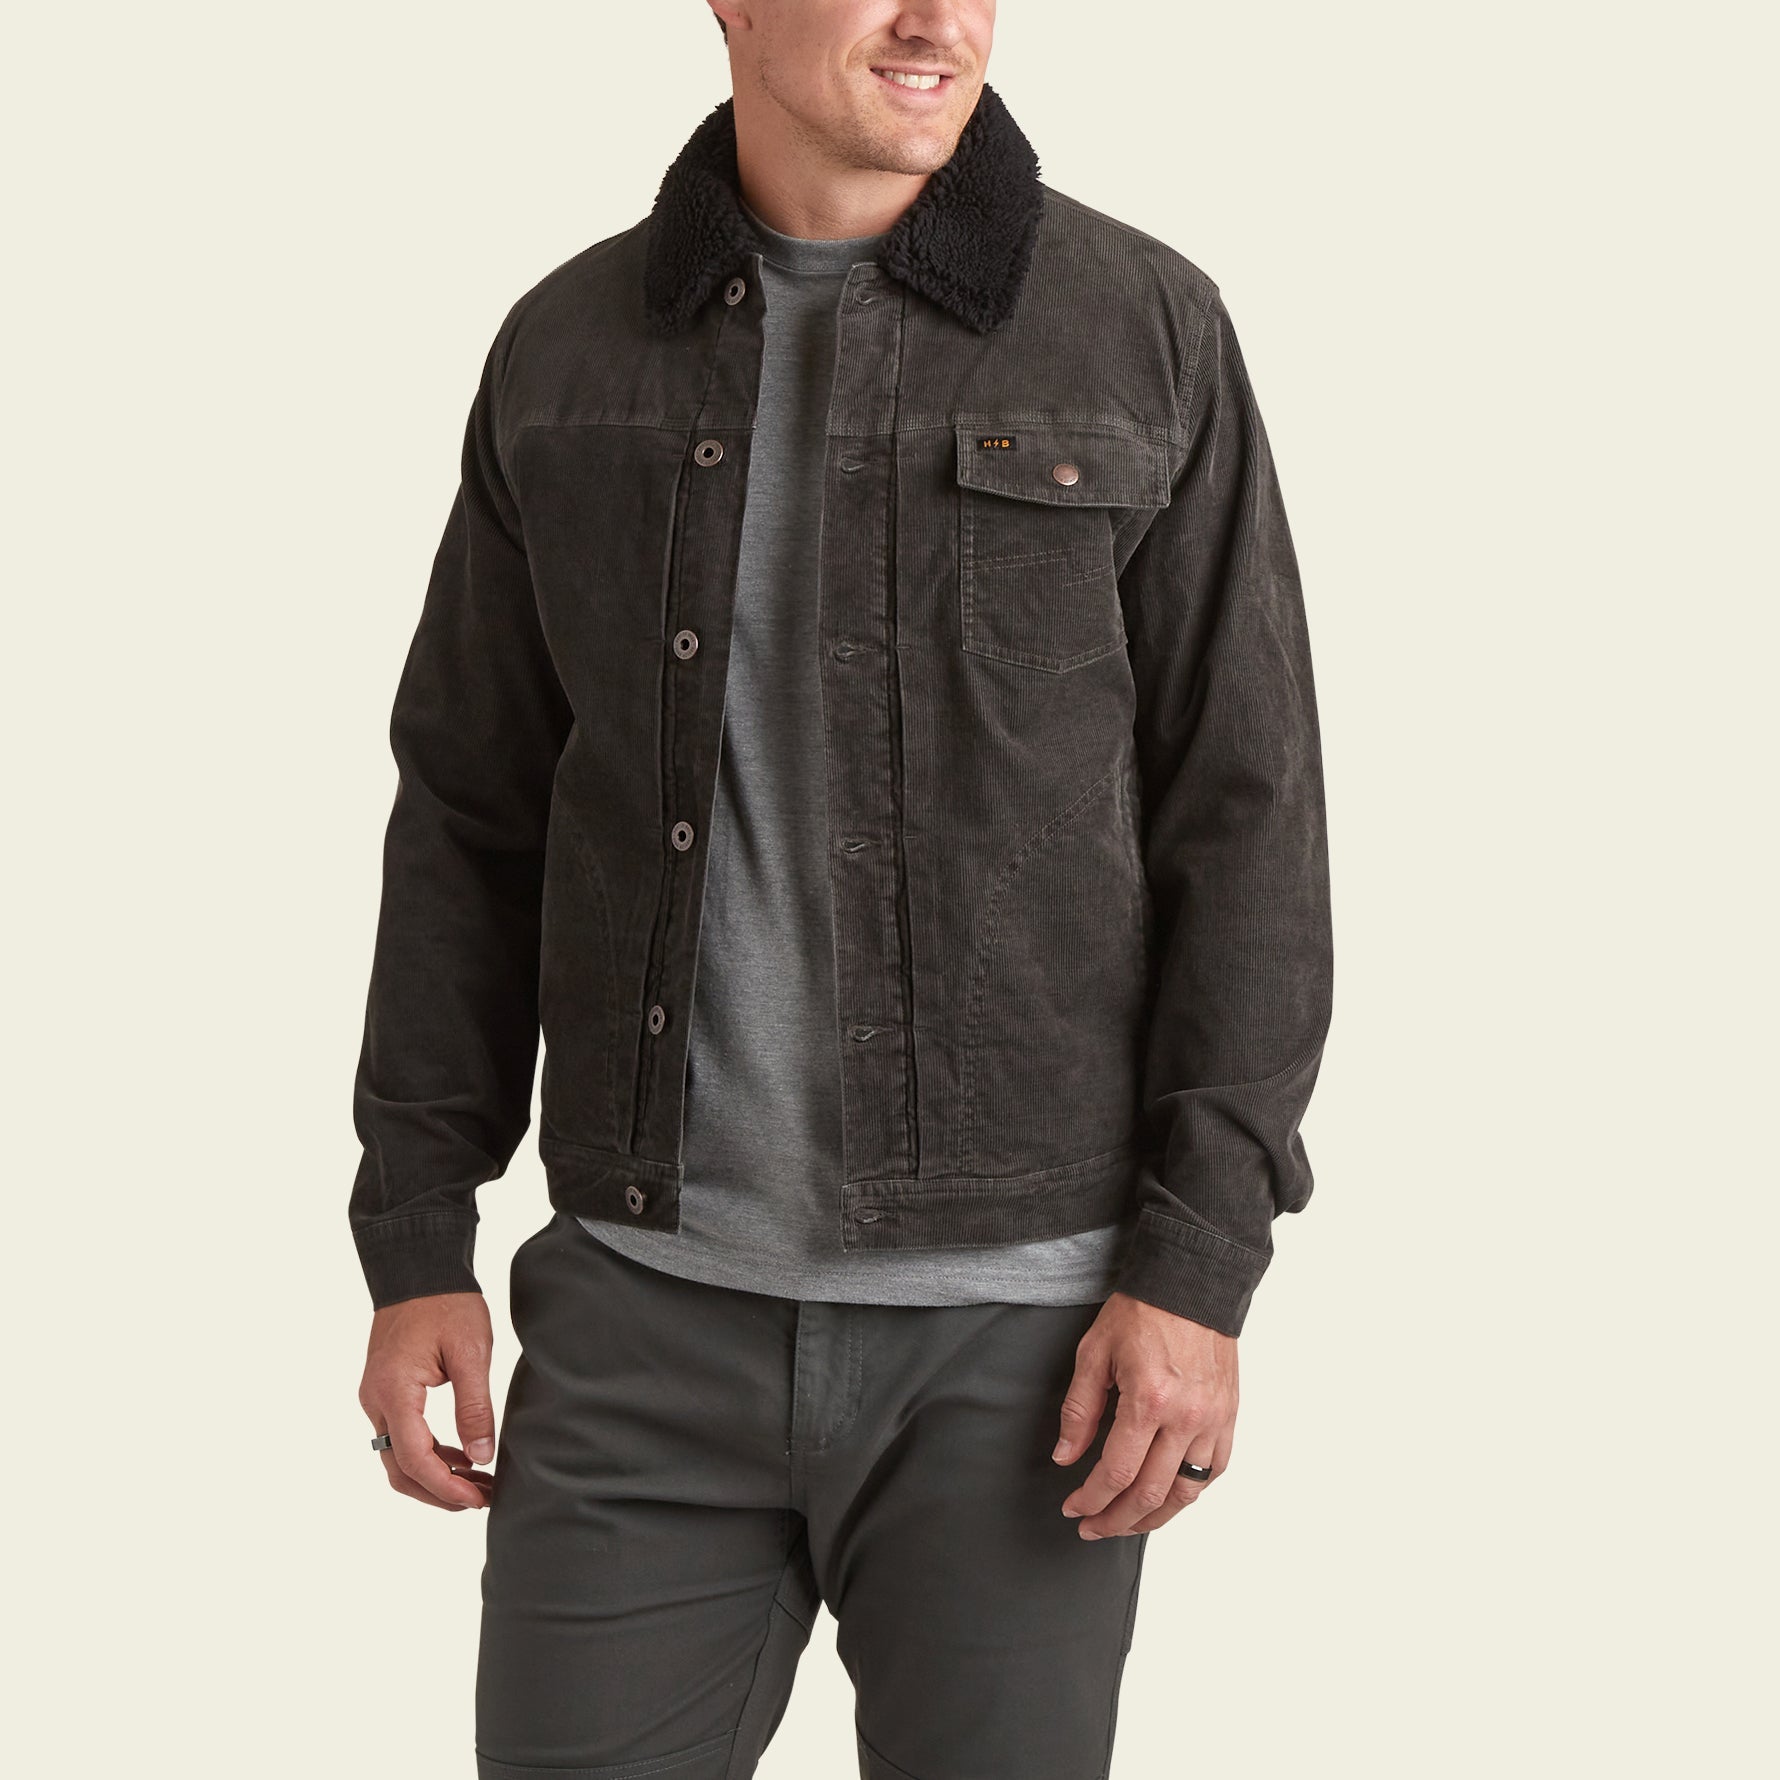 Howler Brothers Fuzzy Depot Jacket - 88 Gear